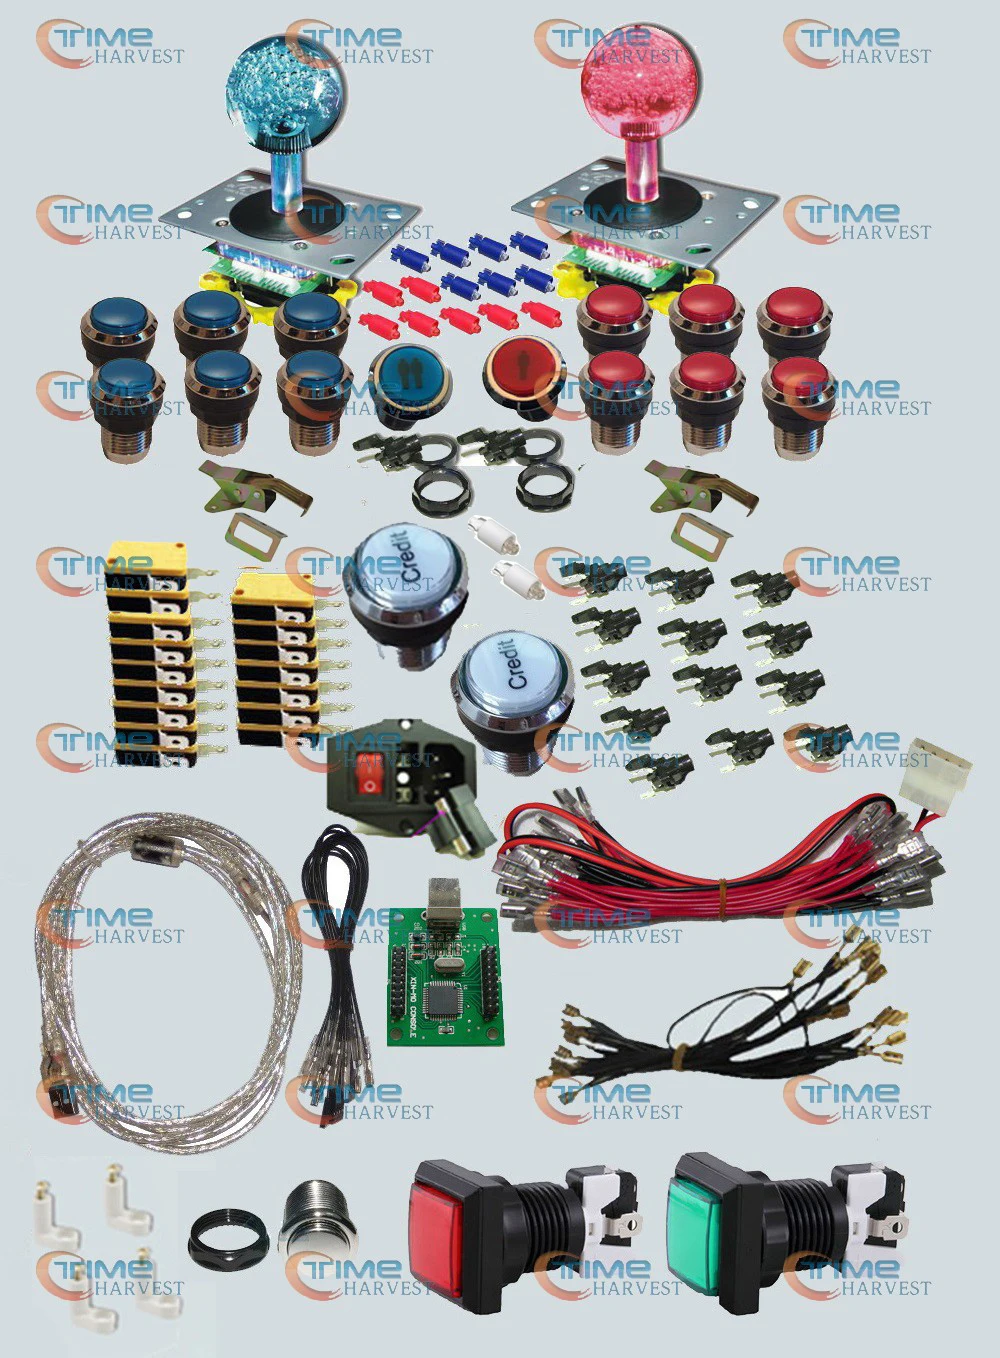 Arcade parts Bundles kit With LED Joystick chrome Illuminated buttons Microswitch 2 player USB to Jamma Build Up Arcade cabinet